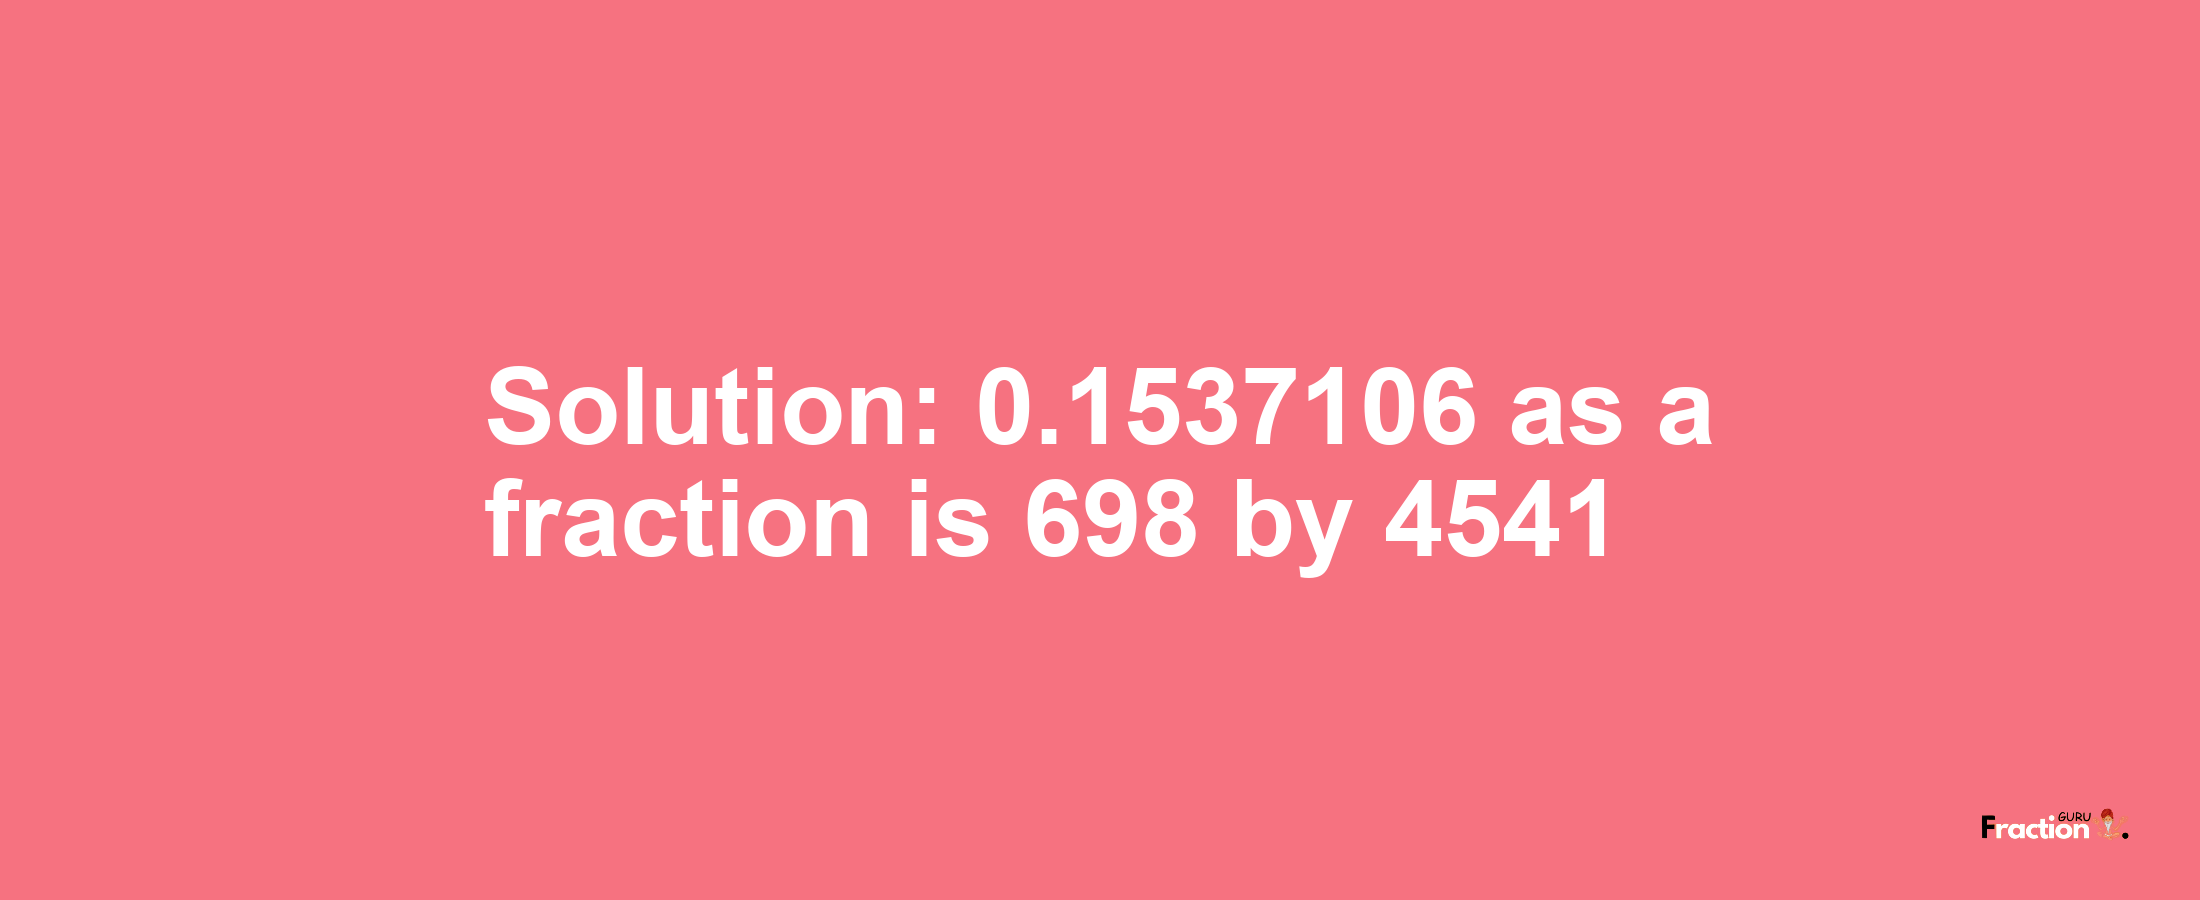 Solution:0.1537106 as a fraction is 698/4541